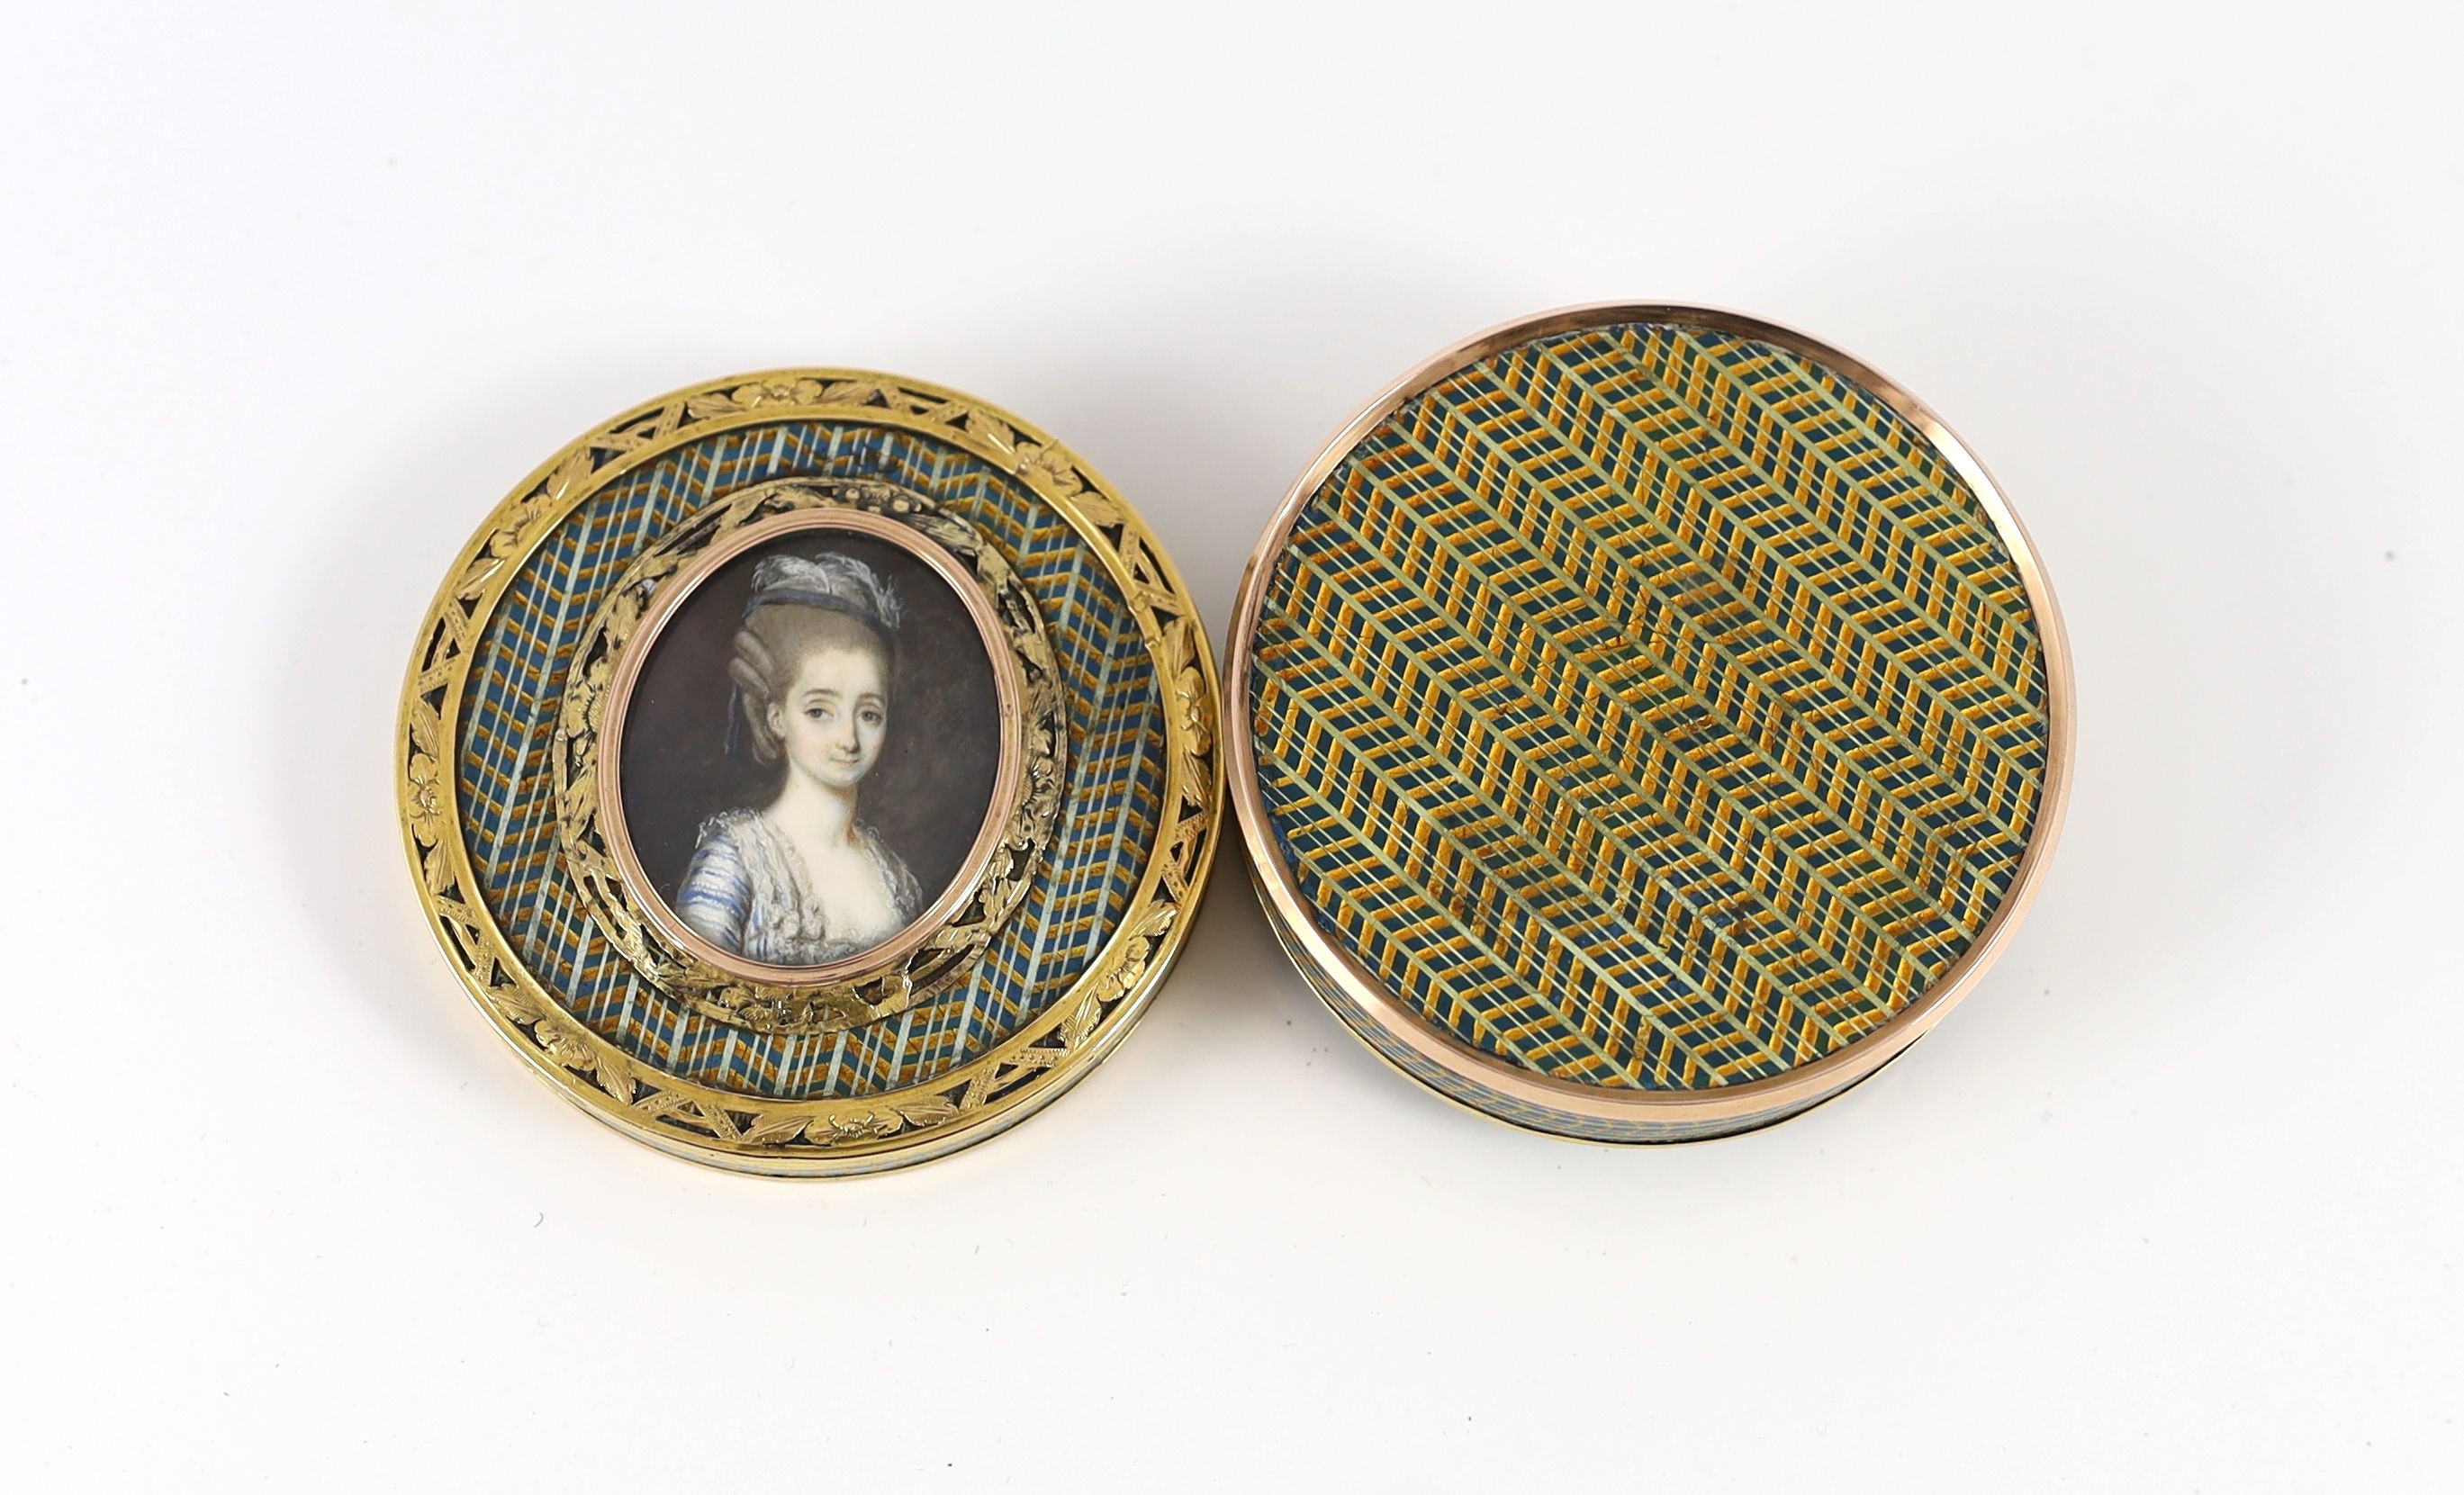 A late 18th century tortoiseshell boîte-à-miniature, the cove decorated with an inset portrait miniature of a young lady, mounted with pierced yellow metal borders 7.5cm diameter